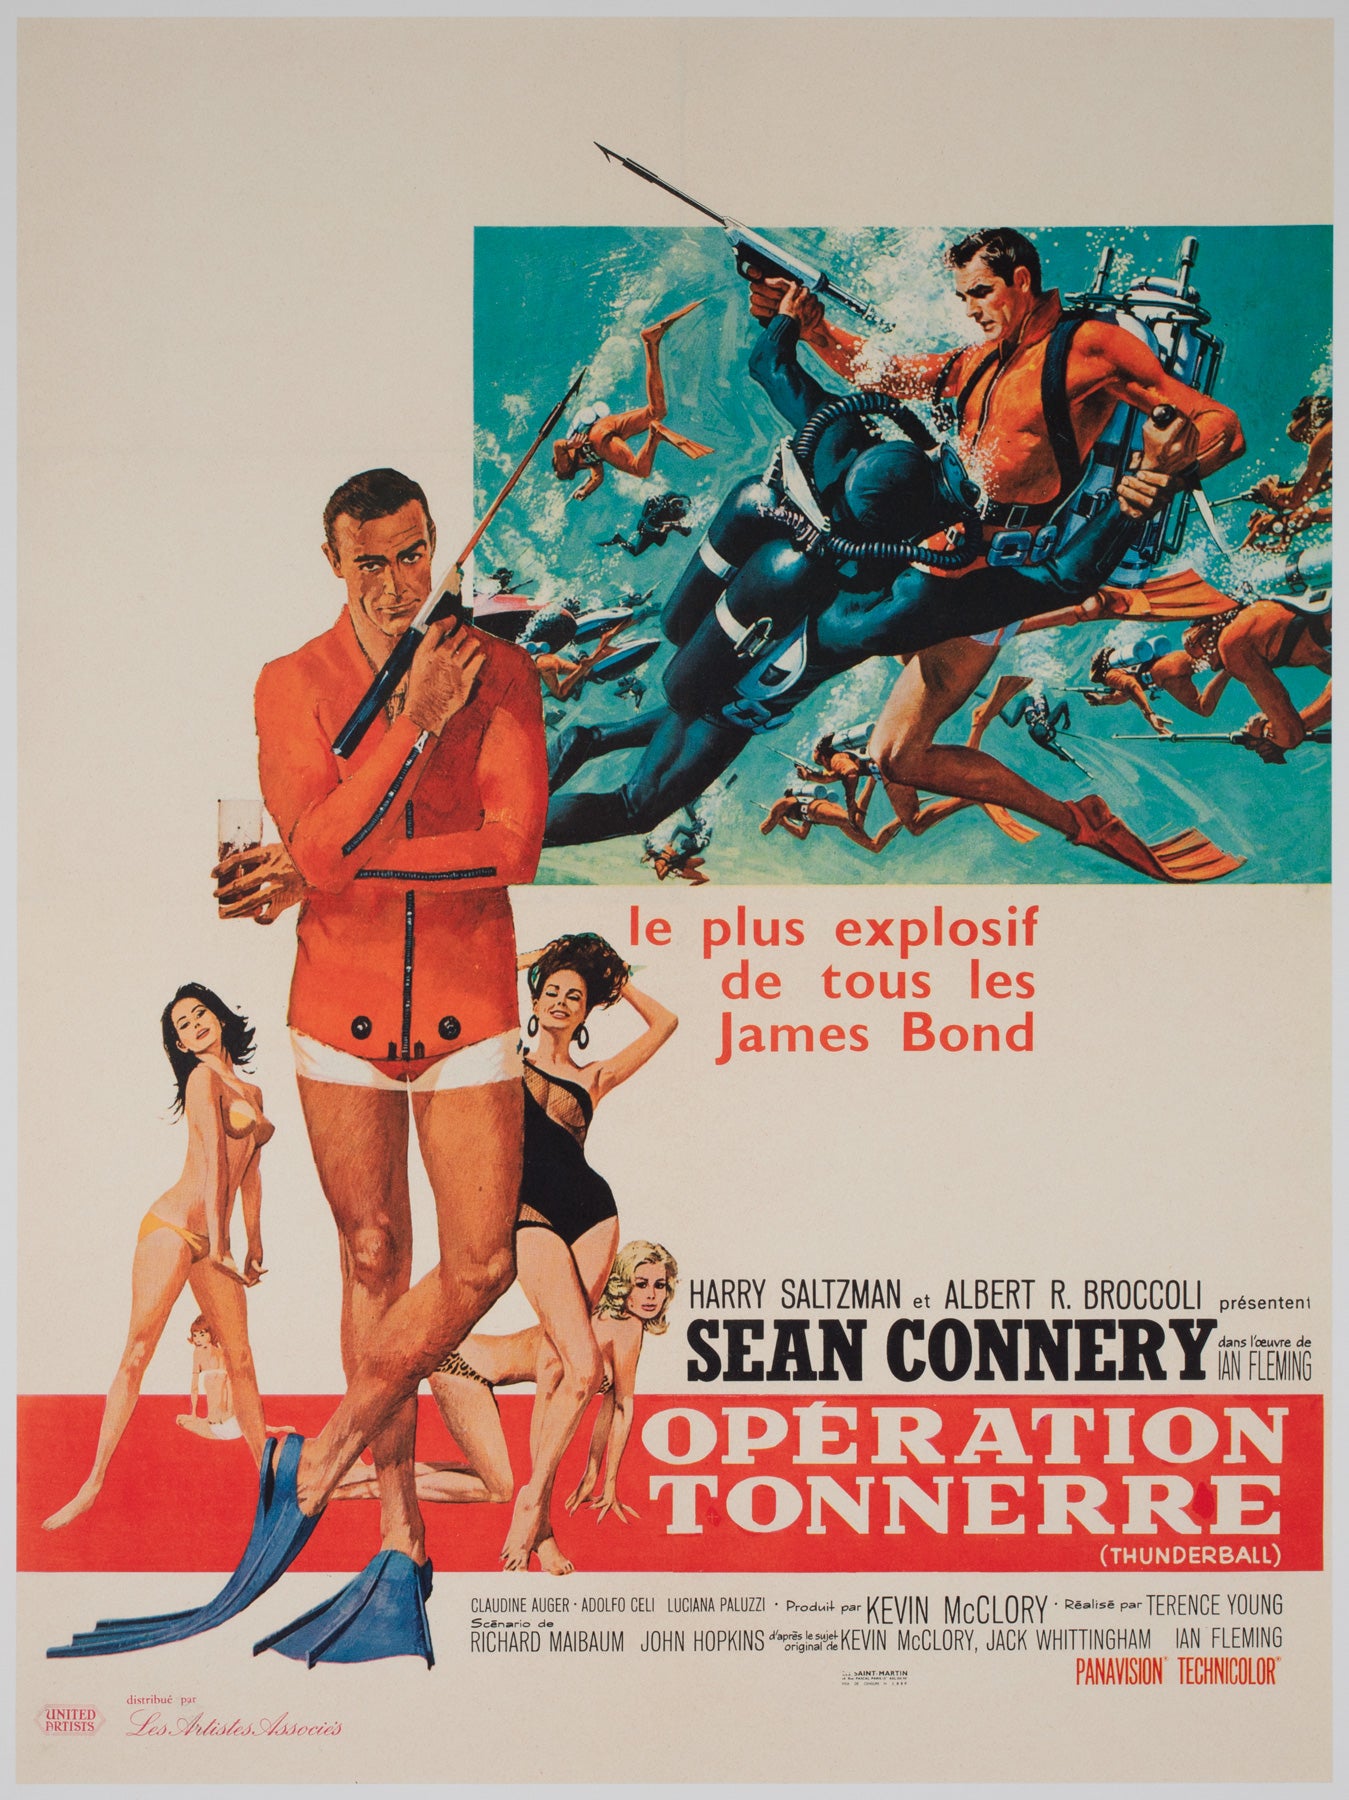 Thunderball 1965 French Moyenne Film Movie Poster, Robert McGinnis and Frank McCarthy